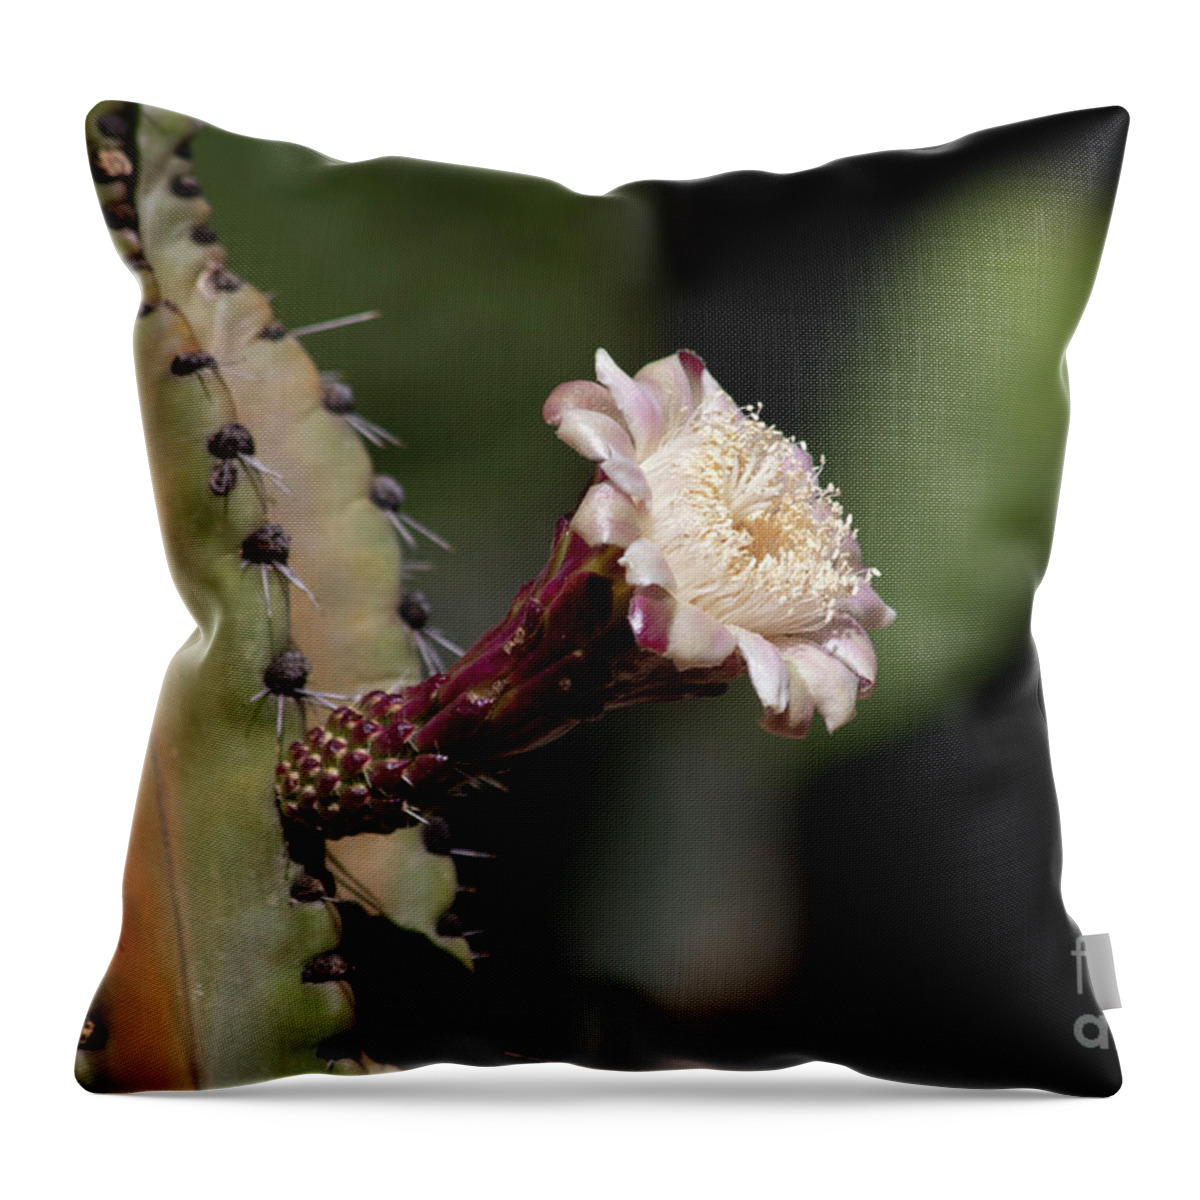 Cactus Flower Throw Pillow featuring the photograph Stunning Cactus Flower by Elisabeth Lucas